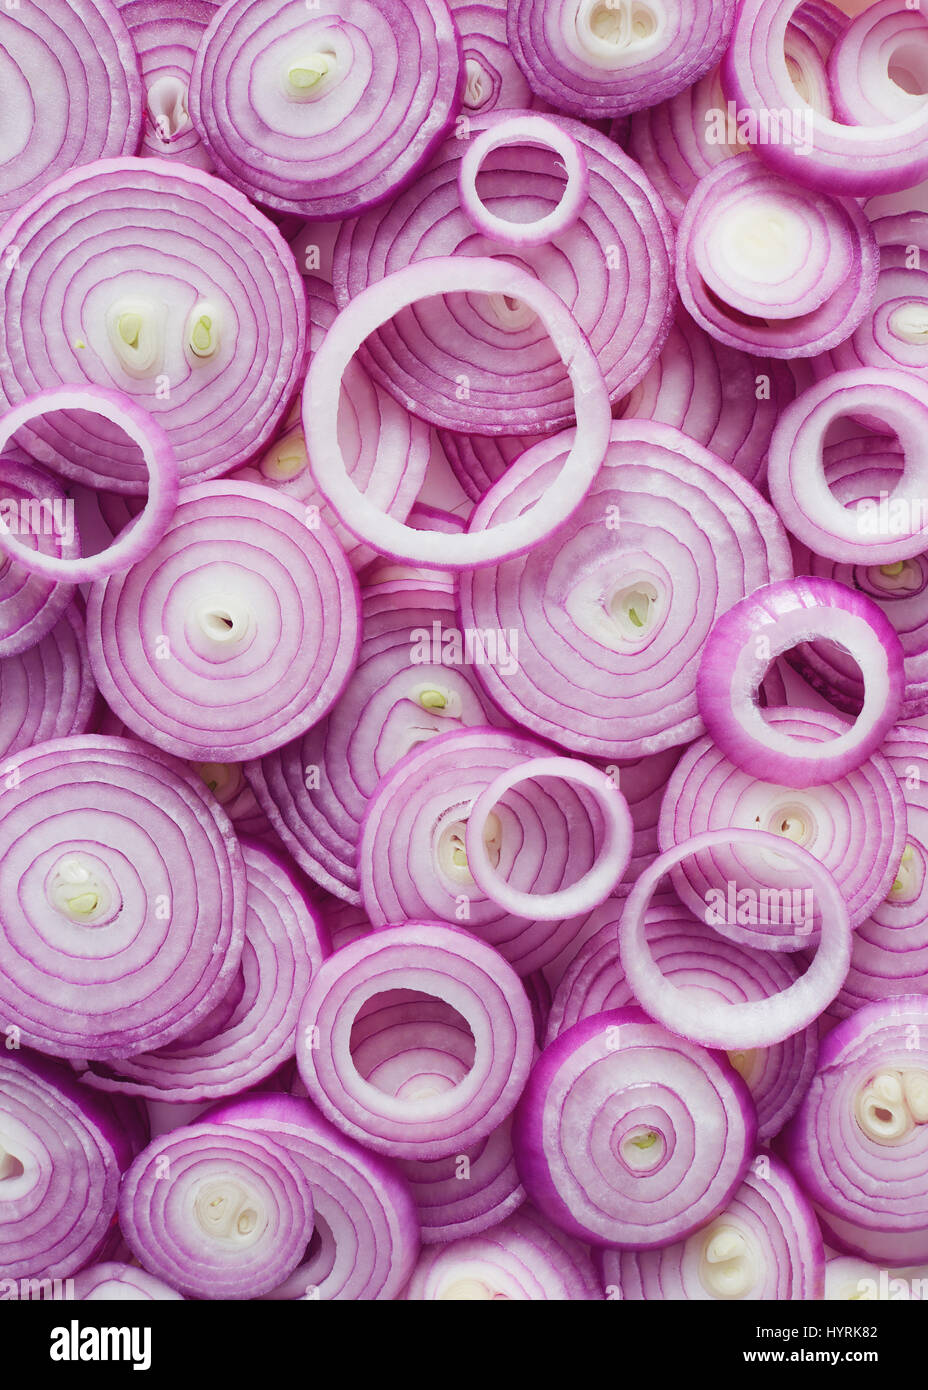 Red Onion Slices. Sliced red onion rings. Stock Photo